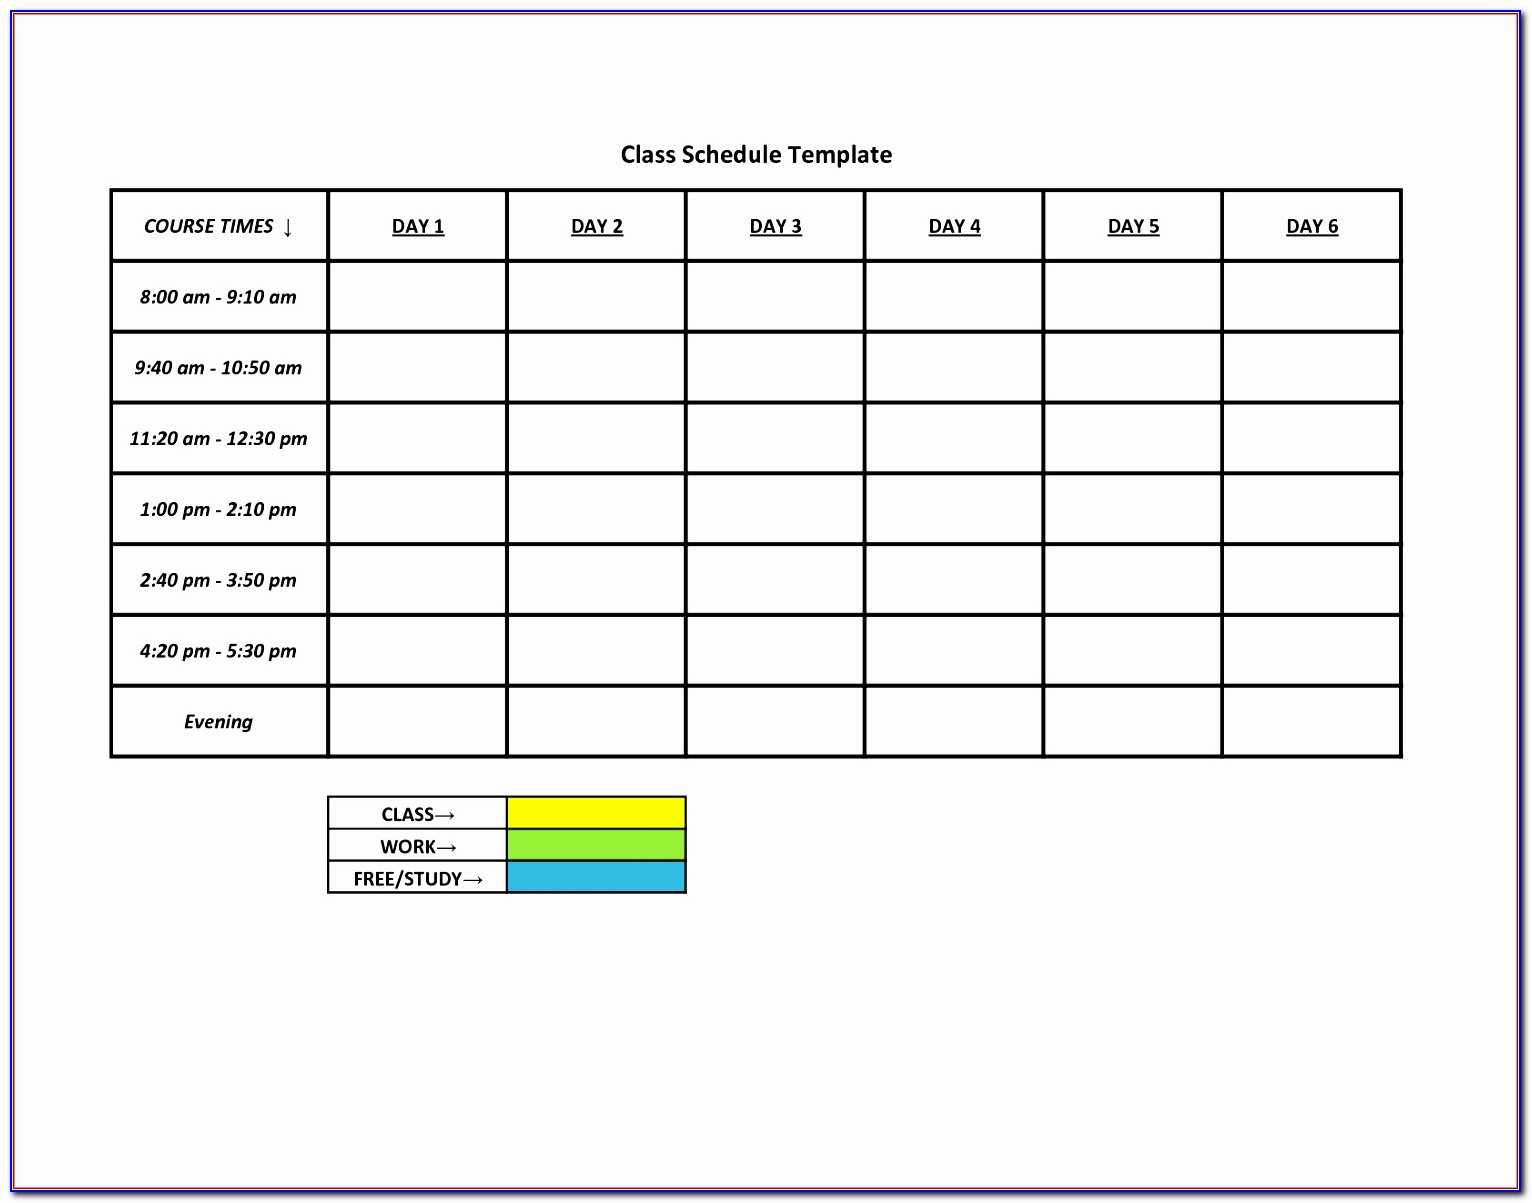 daily-staff-roster-excel-template